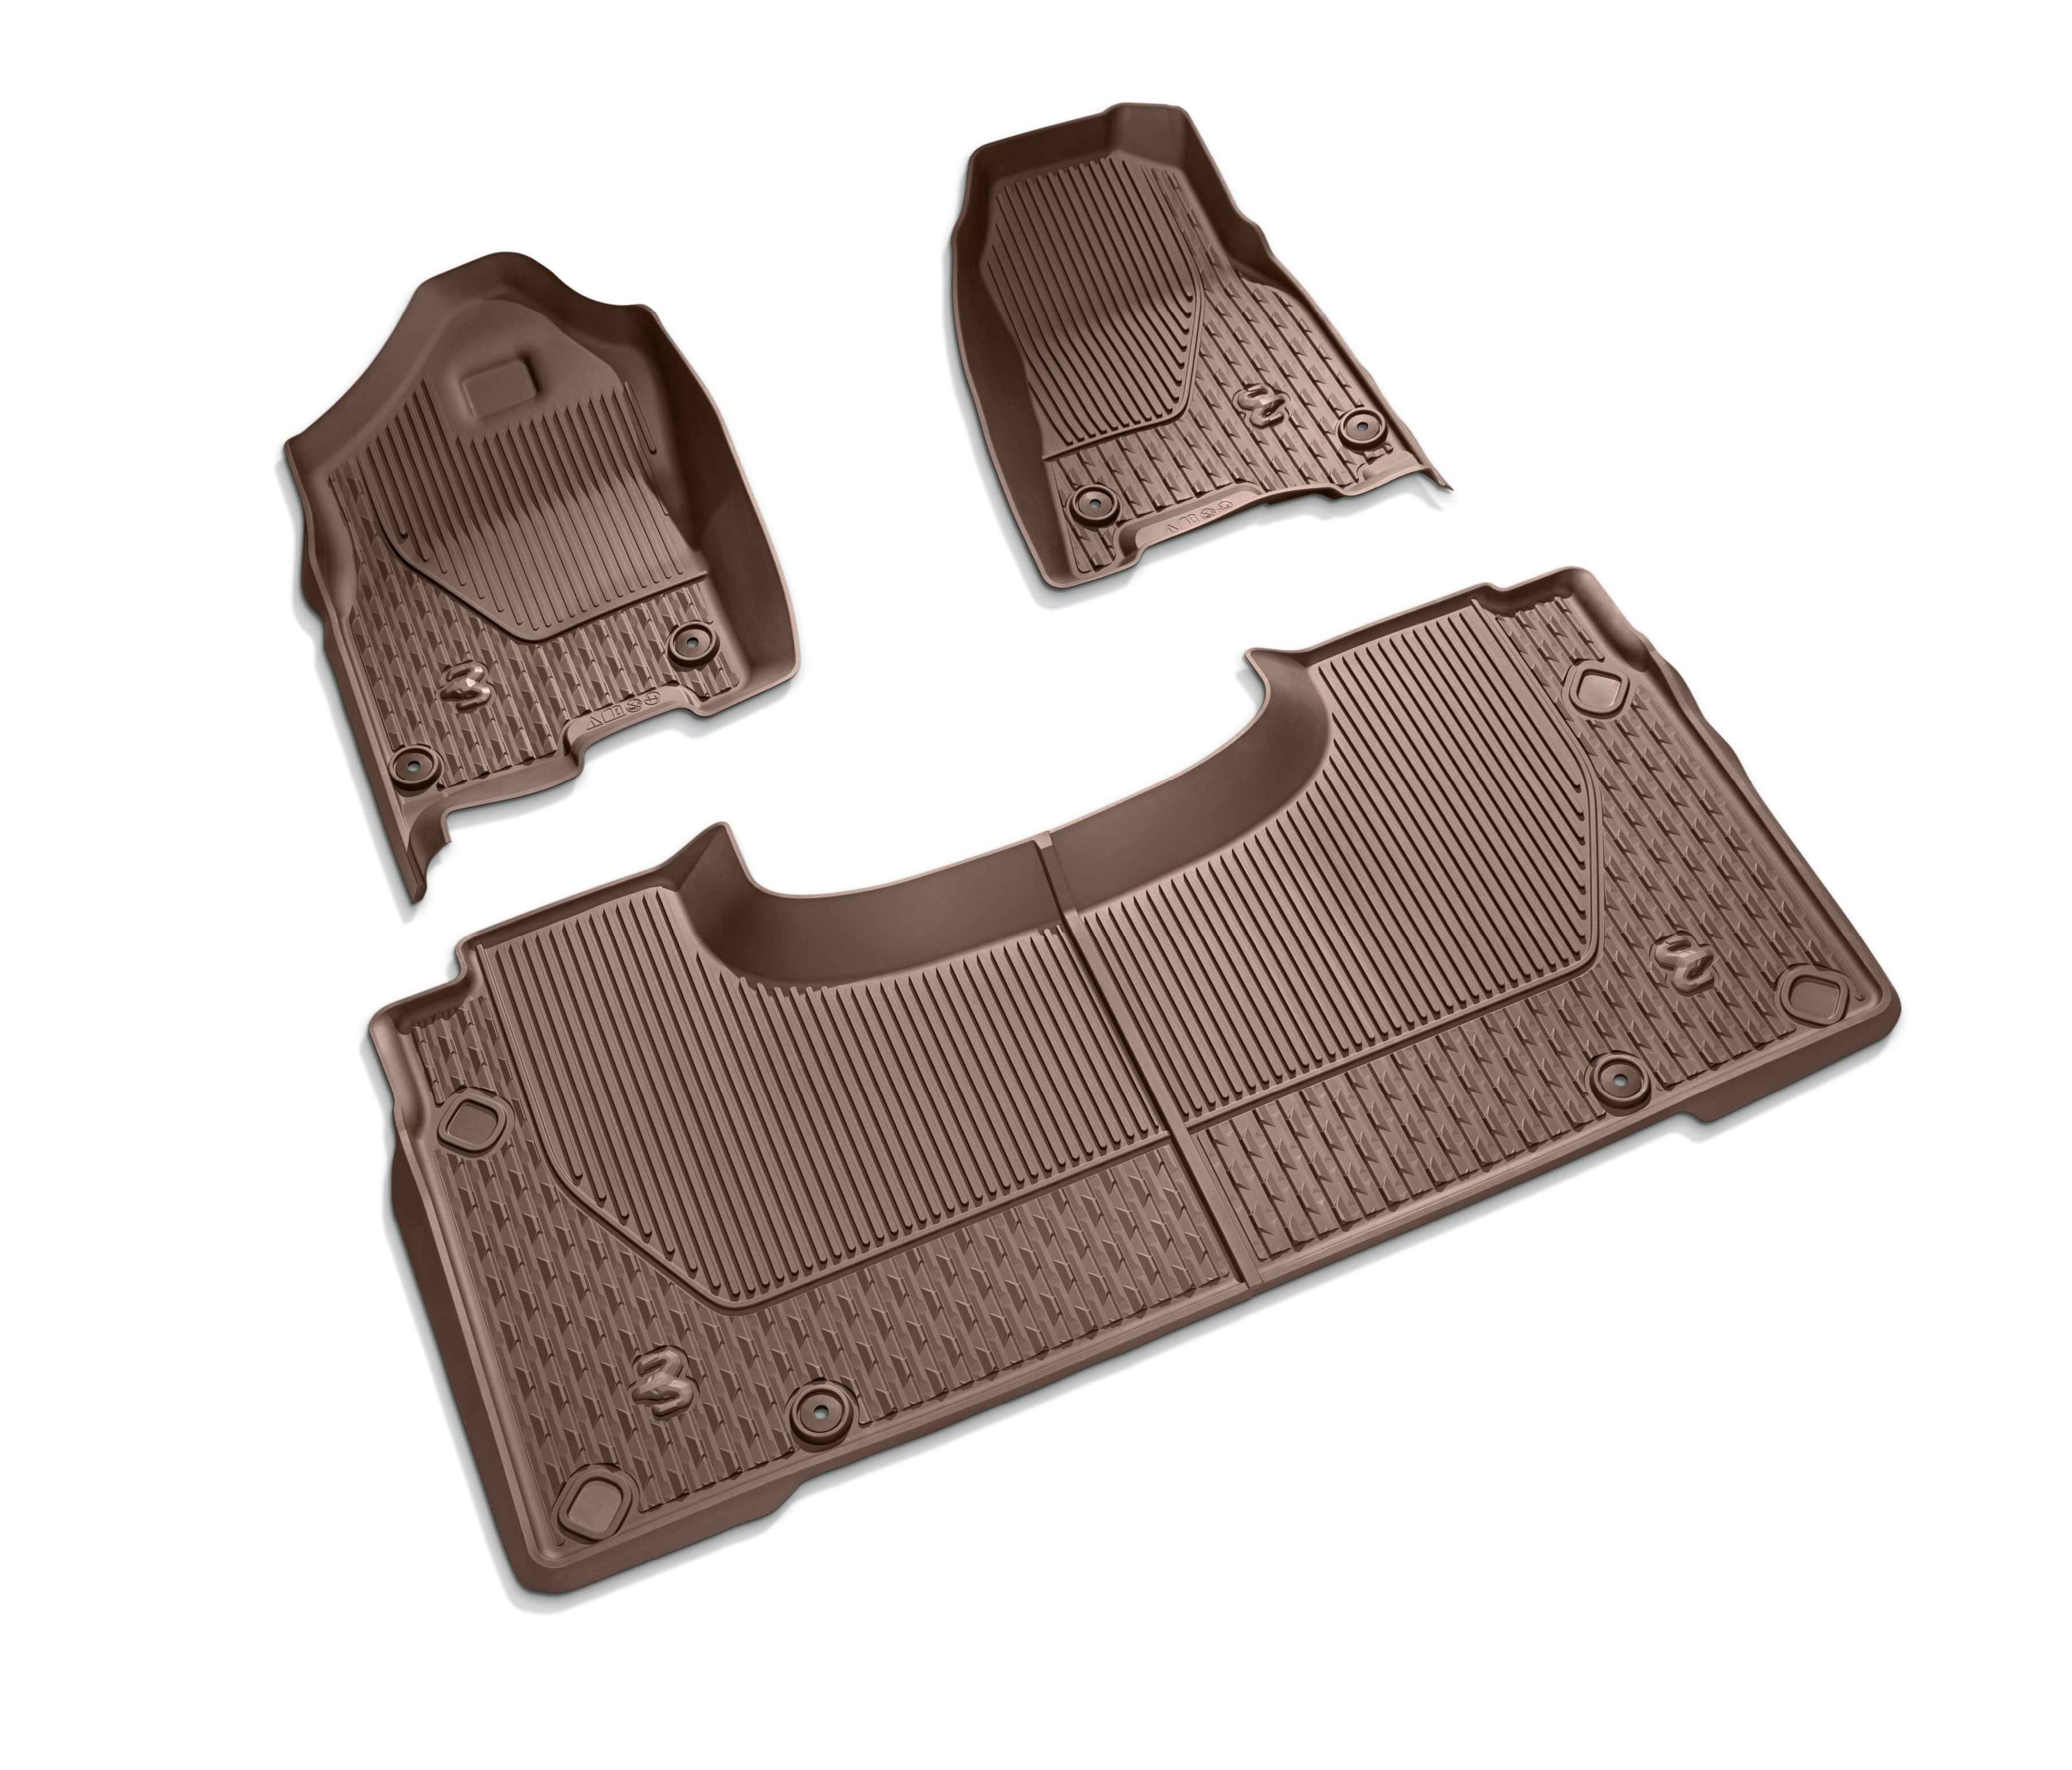 All-Weather Floor Mats, Front & Rear -- Quad (Brown)